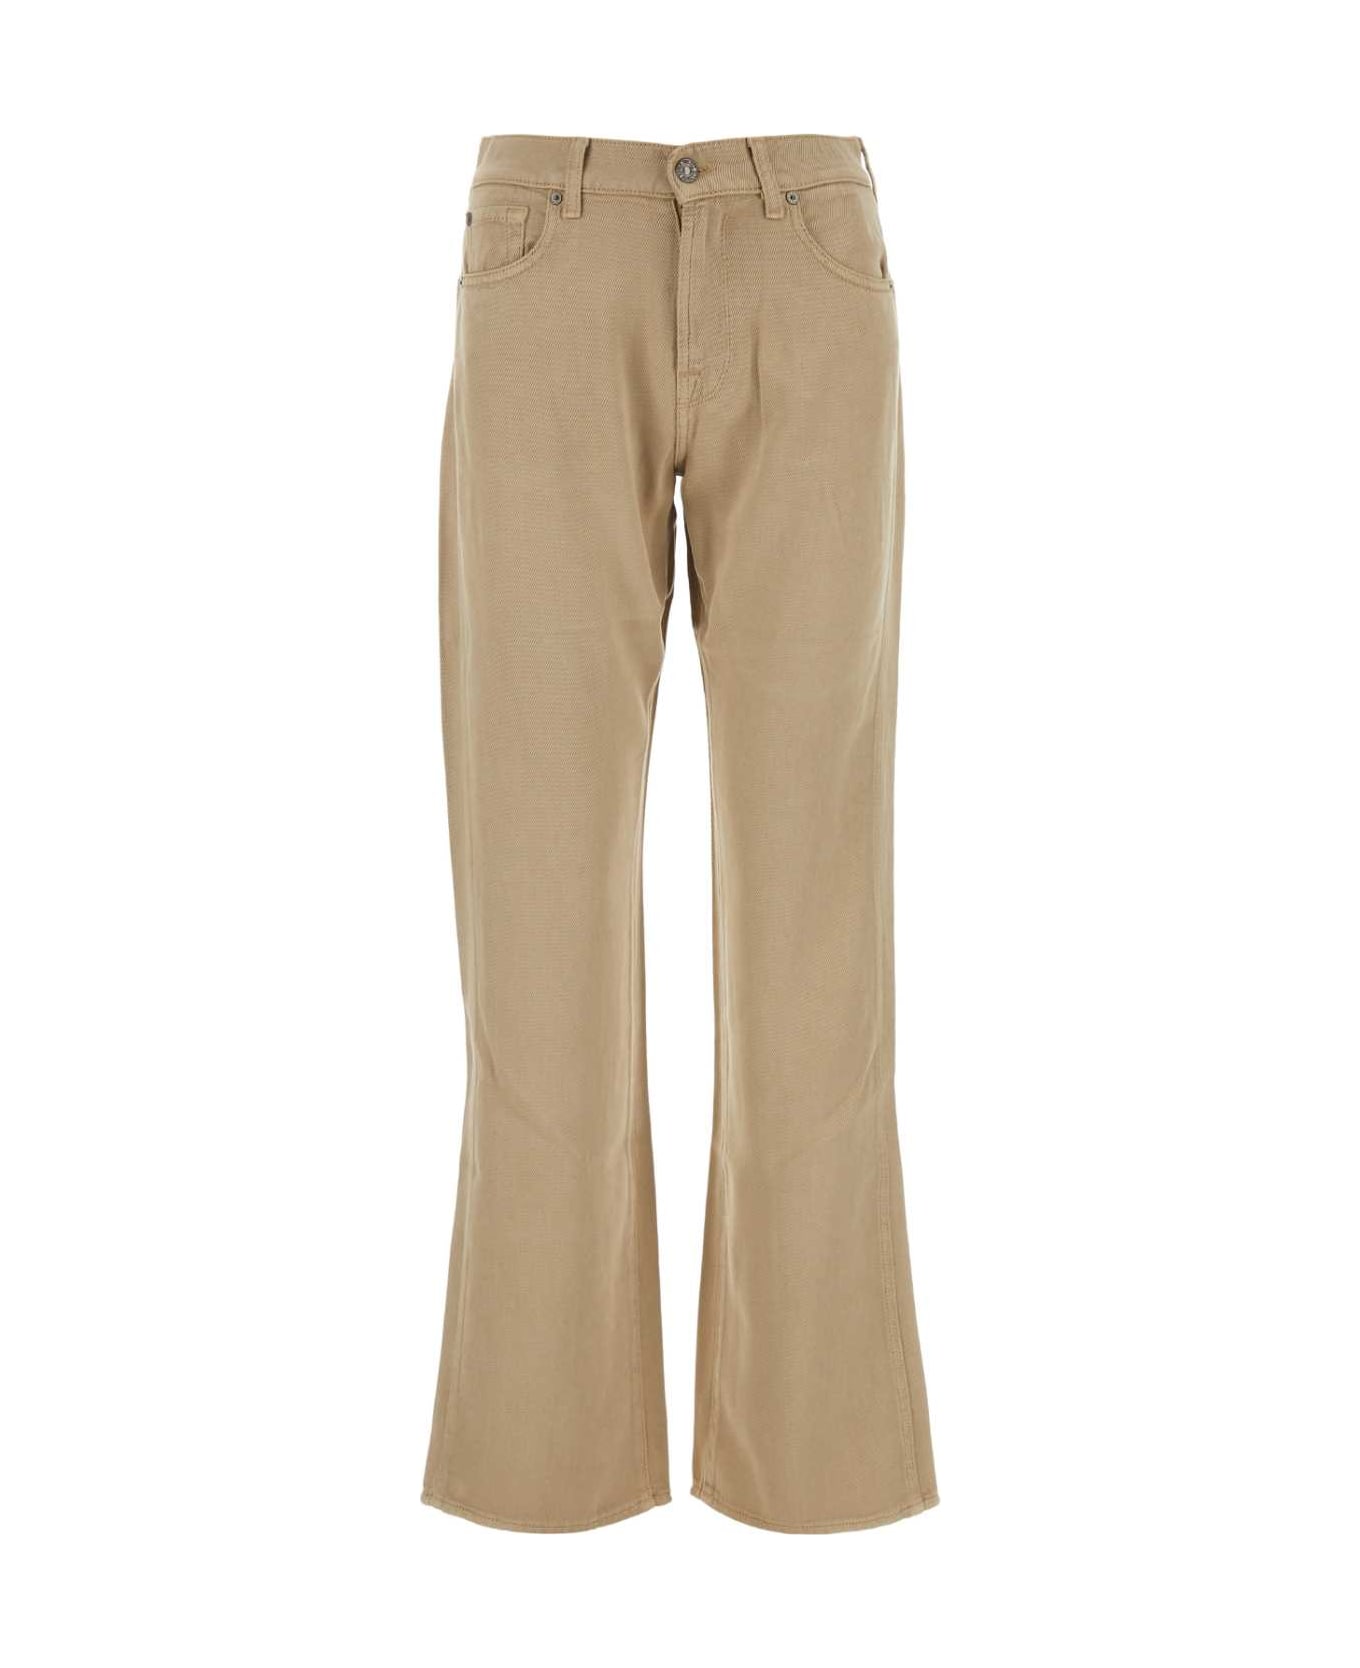 7 For All Mankind Camel Tencel Tess Pant - BEIGE